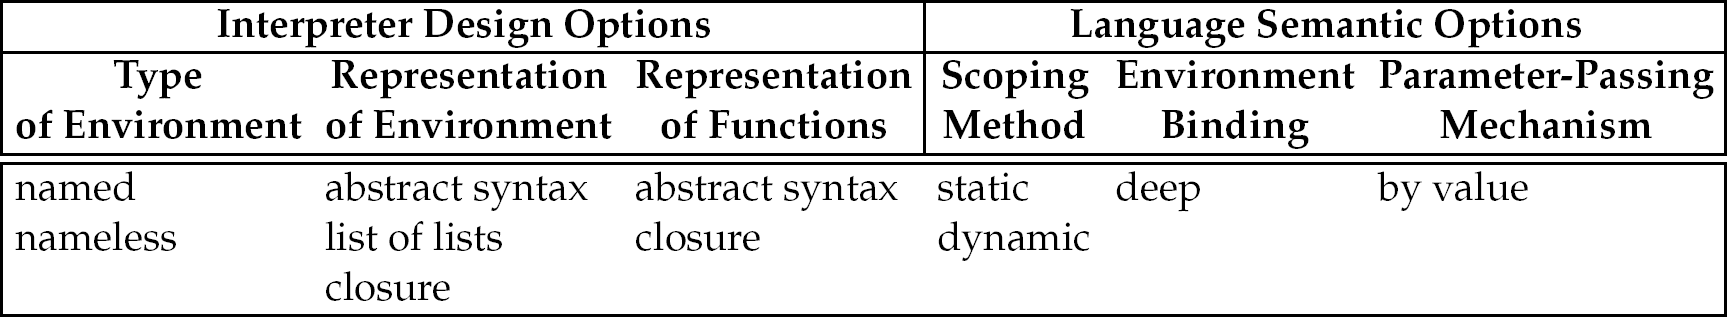 A table for interpreter design options and language semantic options in Camille.